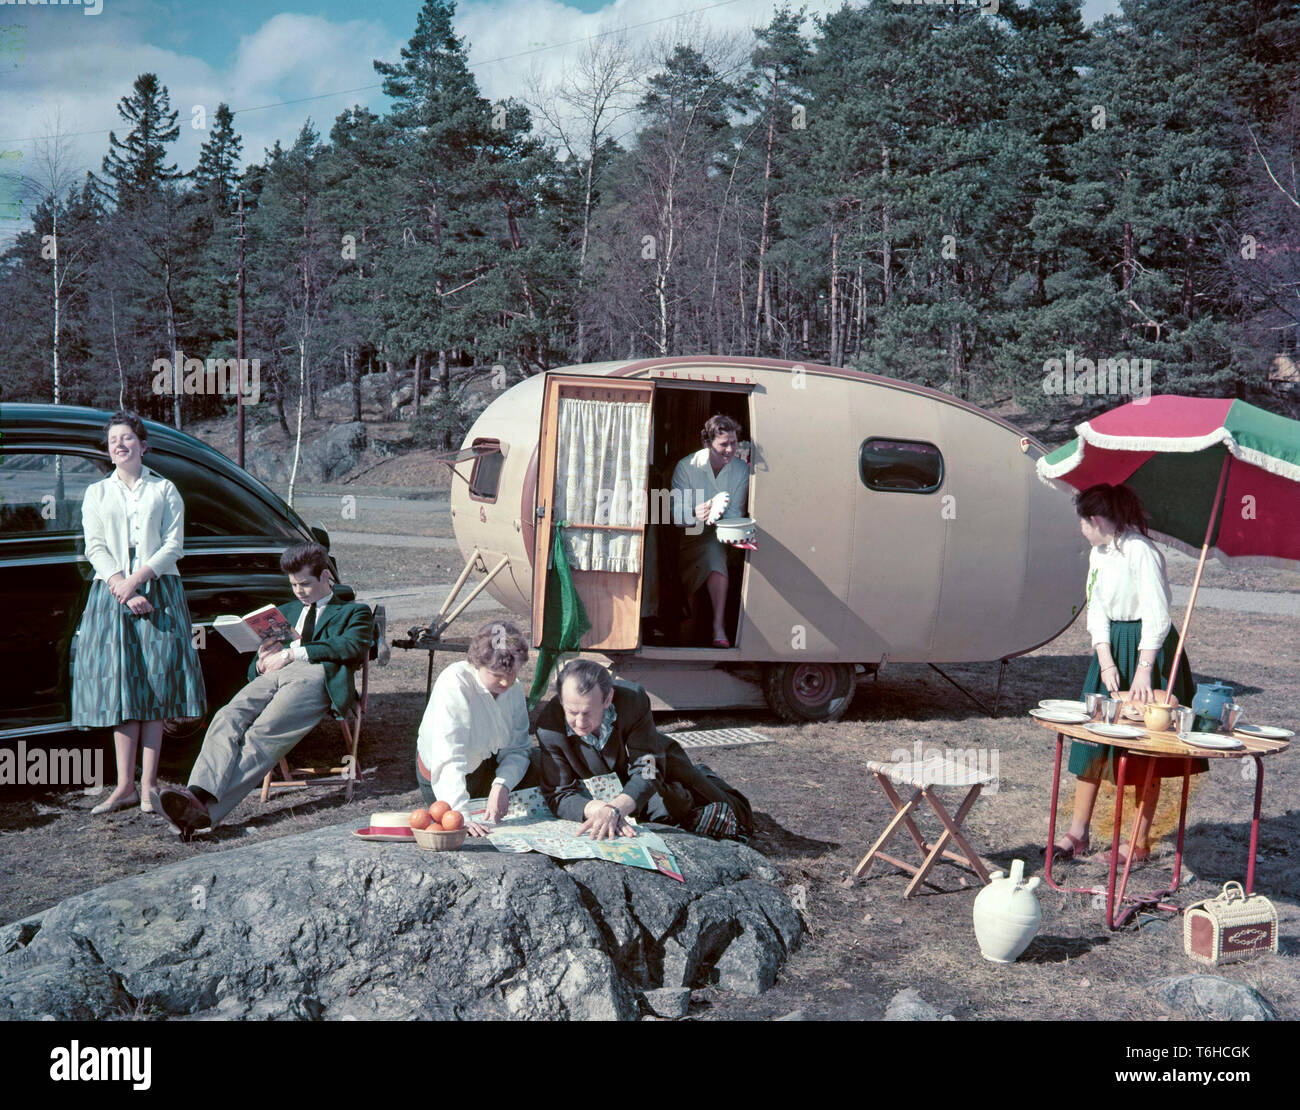 1950s camping. A family is enjoying their holiday and the practial camping life in their caravan. Demonstrating how well everything works for them even on holiday. The mother holds out a pot with a ready cooked meal while her daughter has set the table. The father and daughter spends their time looking at a map probably to find the next suitable location and campsite. Everything in this pictures illustrates very well the time of the 1950s both in visible objects and clothing. Other aspects of the time is that while the women is pictured cooking, the man is not. Note the model of the caravan an Stock Photo